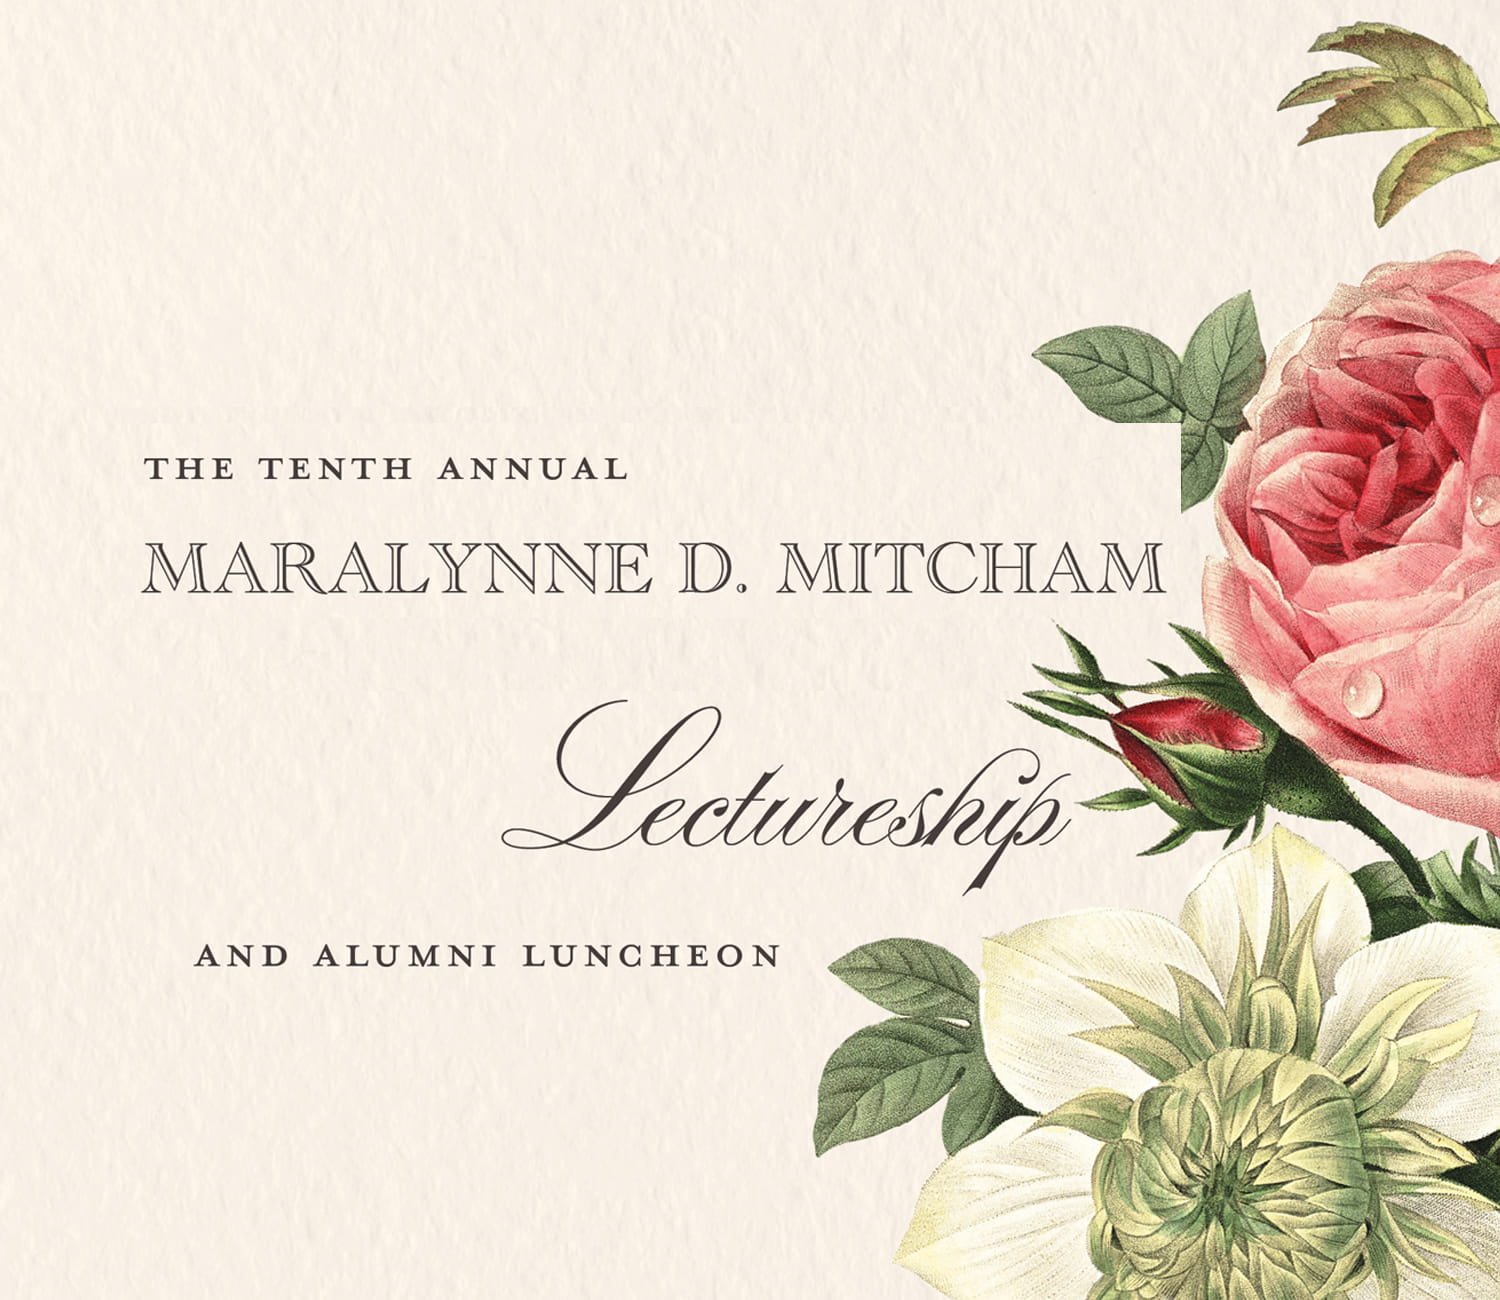 illustration of a rose with the words The tenth annual Maralynne D. Mitcham Lectureship and alumni lunceon